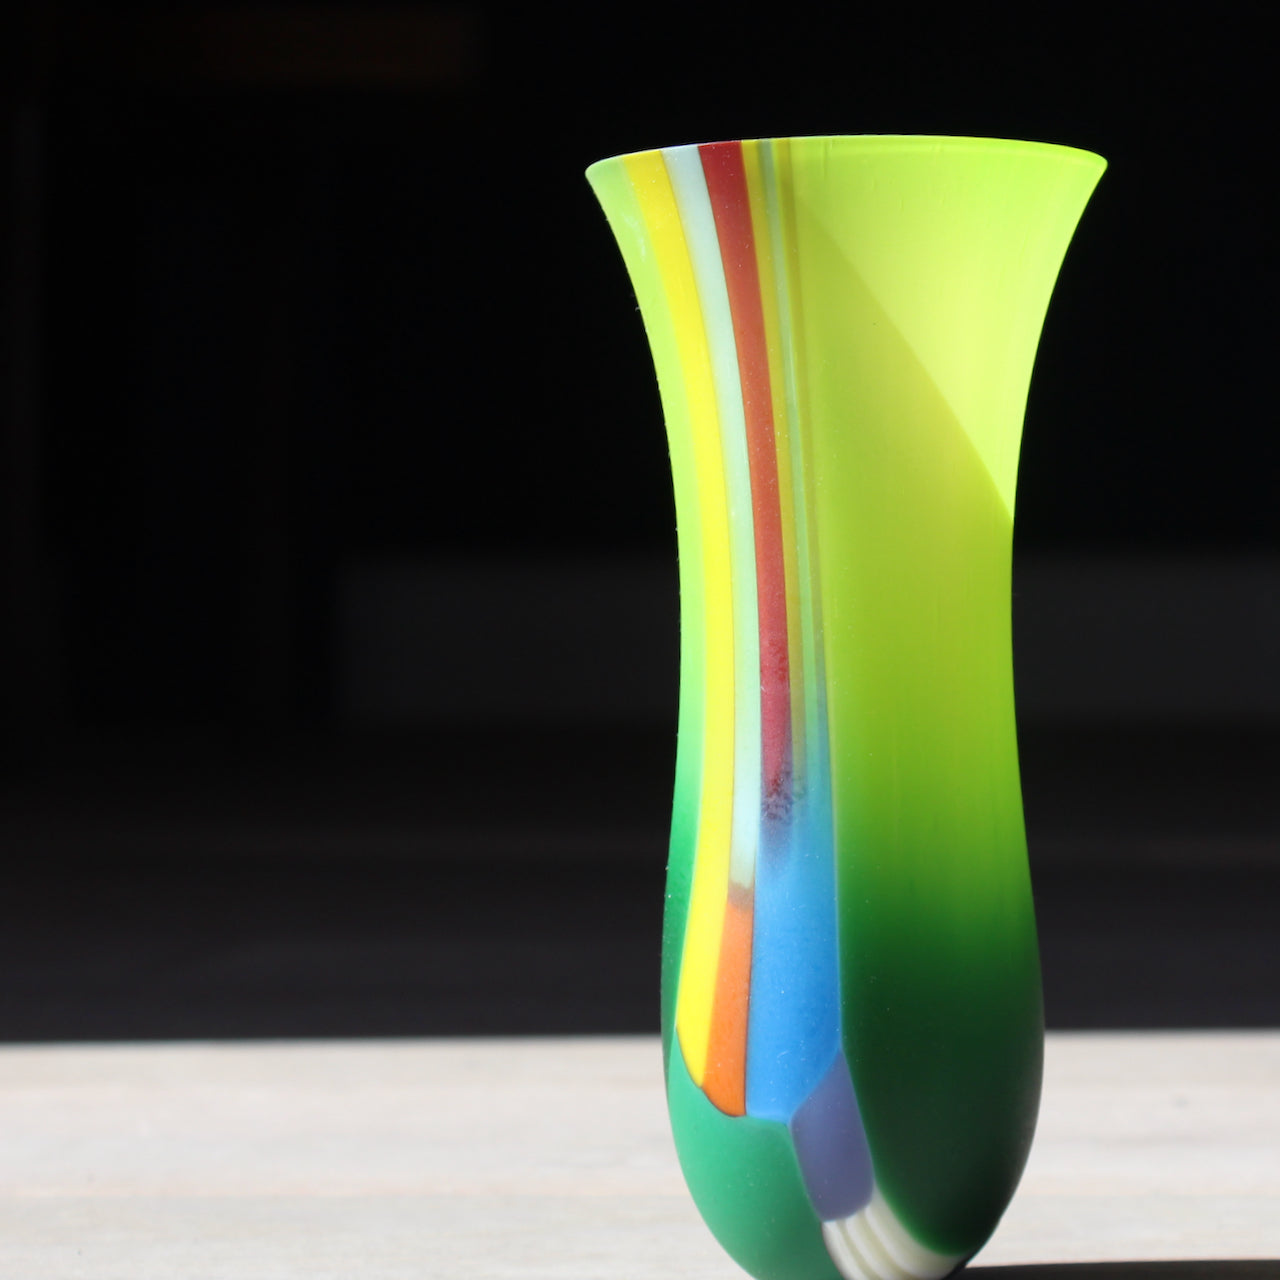 Narrow vibrant coloured glass vase by artist Ruth Shelley in tones of green, yellow, blue and orange